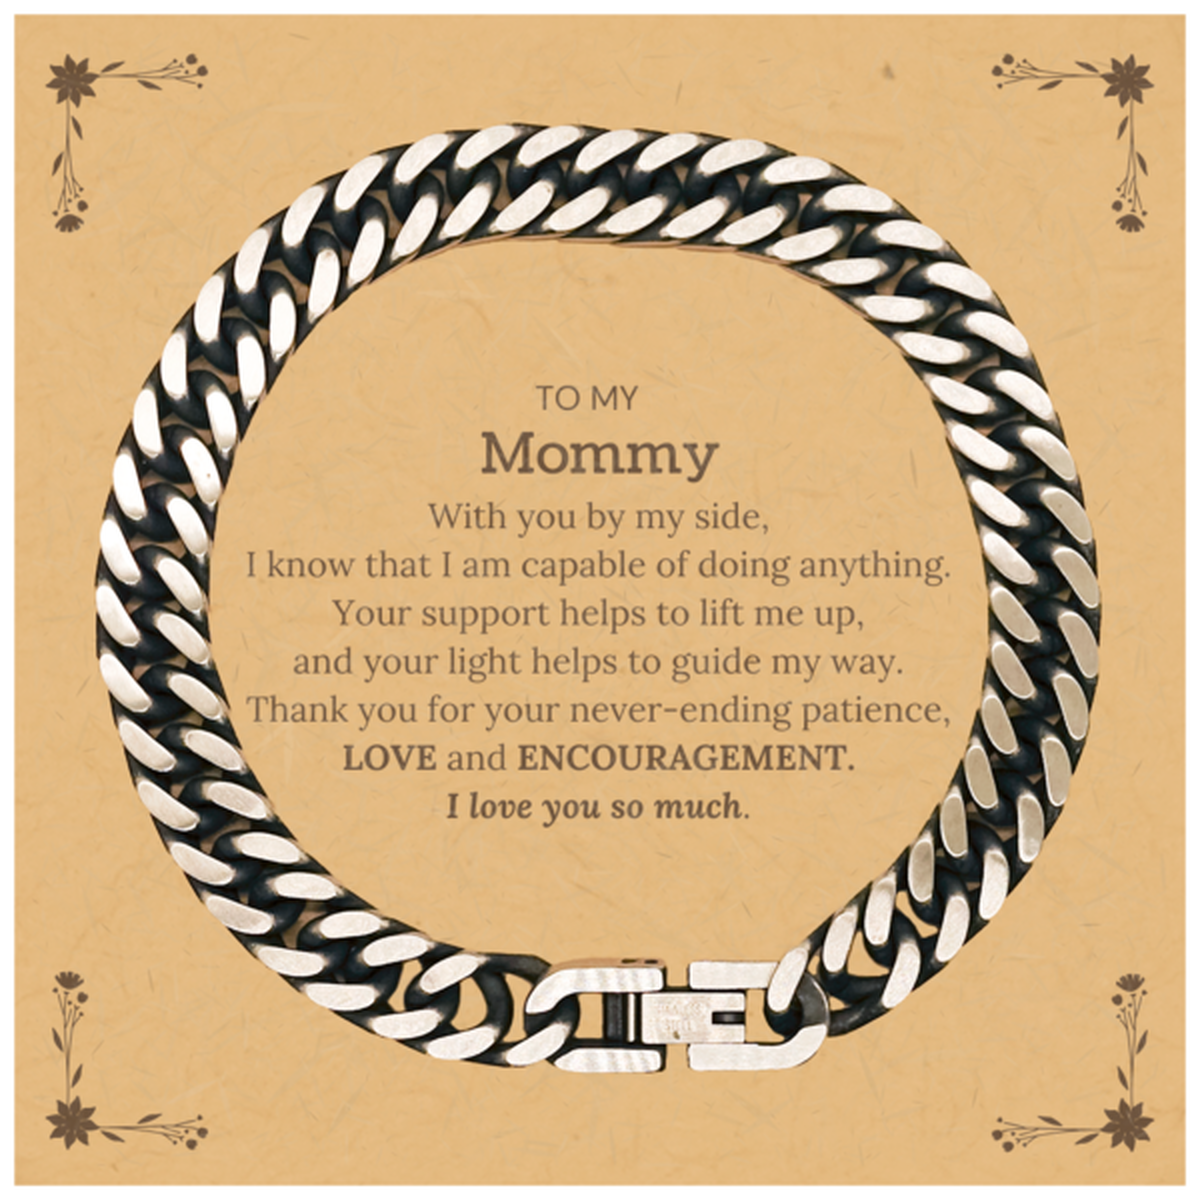 Appreciation Mommy Cuban Link Chain Bracelet Gifts, To My Mommy Birthday Christmas Wedding Keepsake Gifts for Mommy With you by my side, I know that I am capable of doing anything. I love you so much